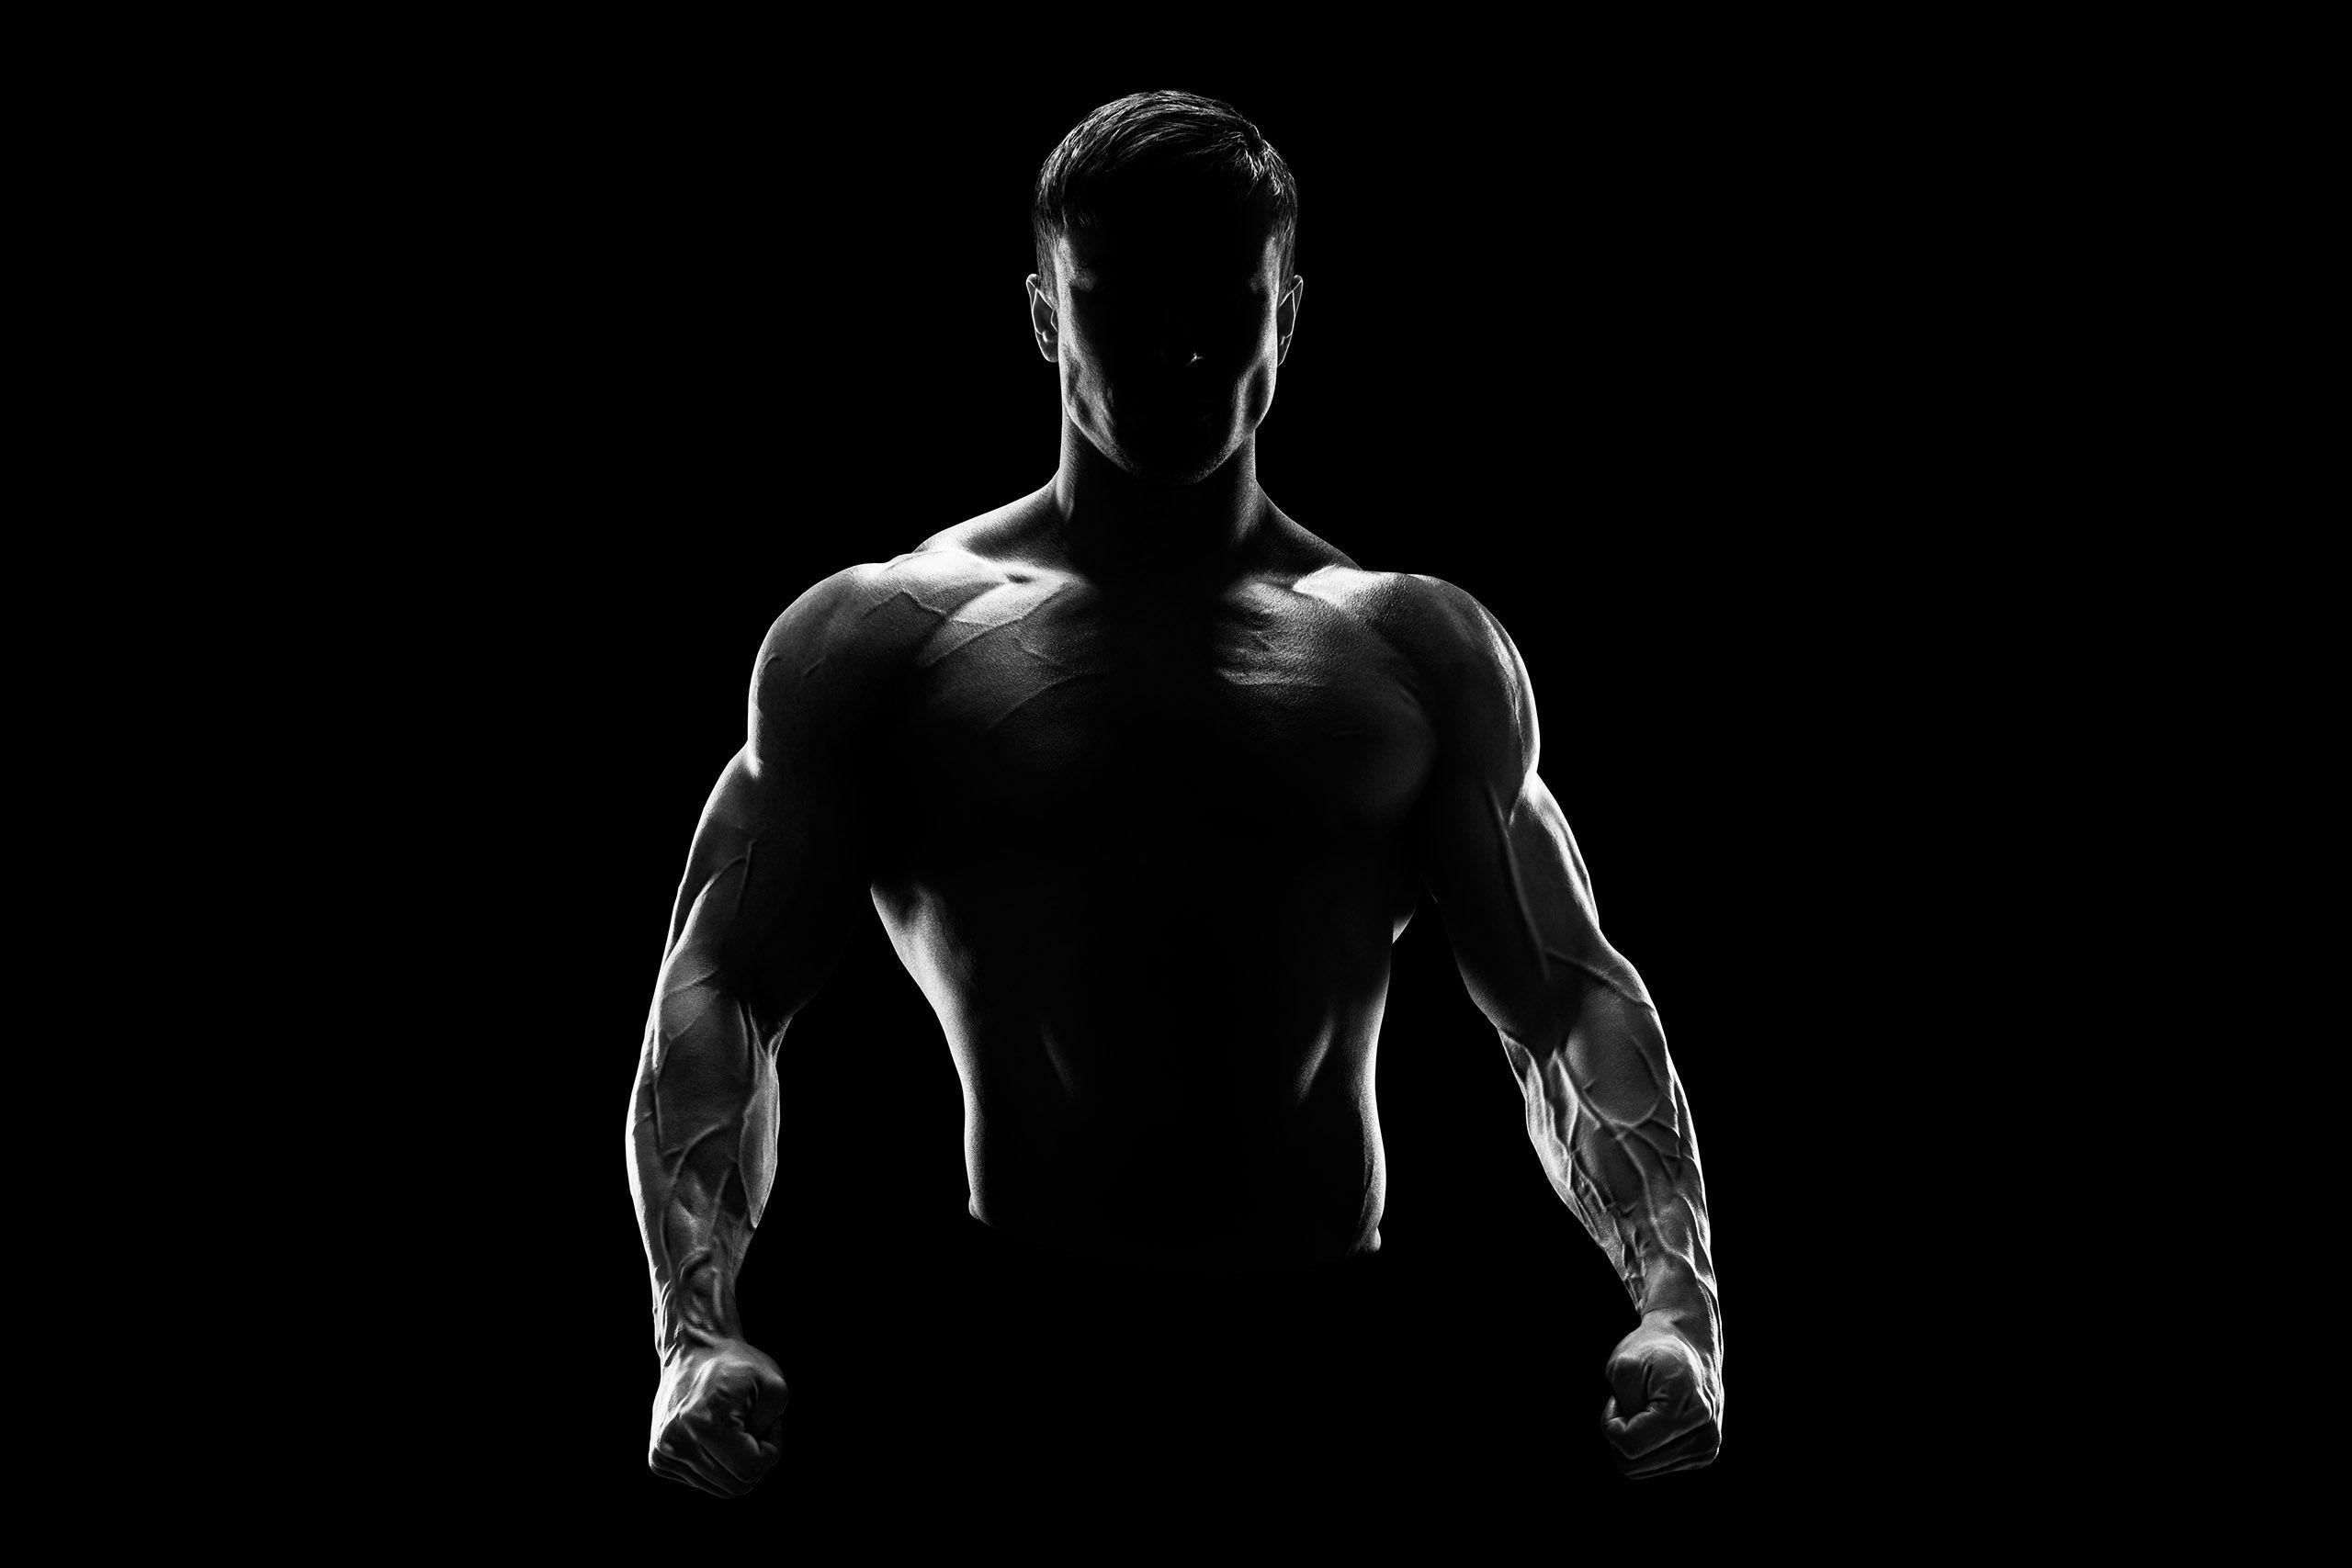 Steroids and Muscle: The Body Image Epidemic Facing Men